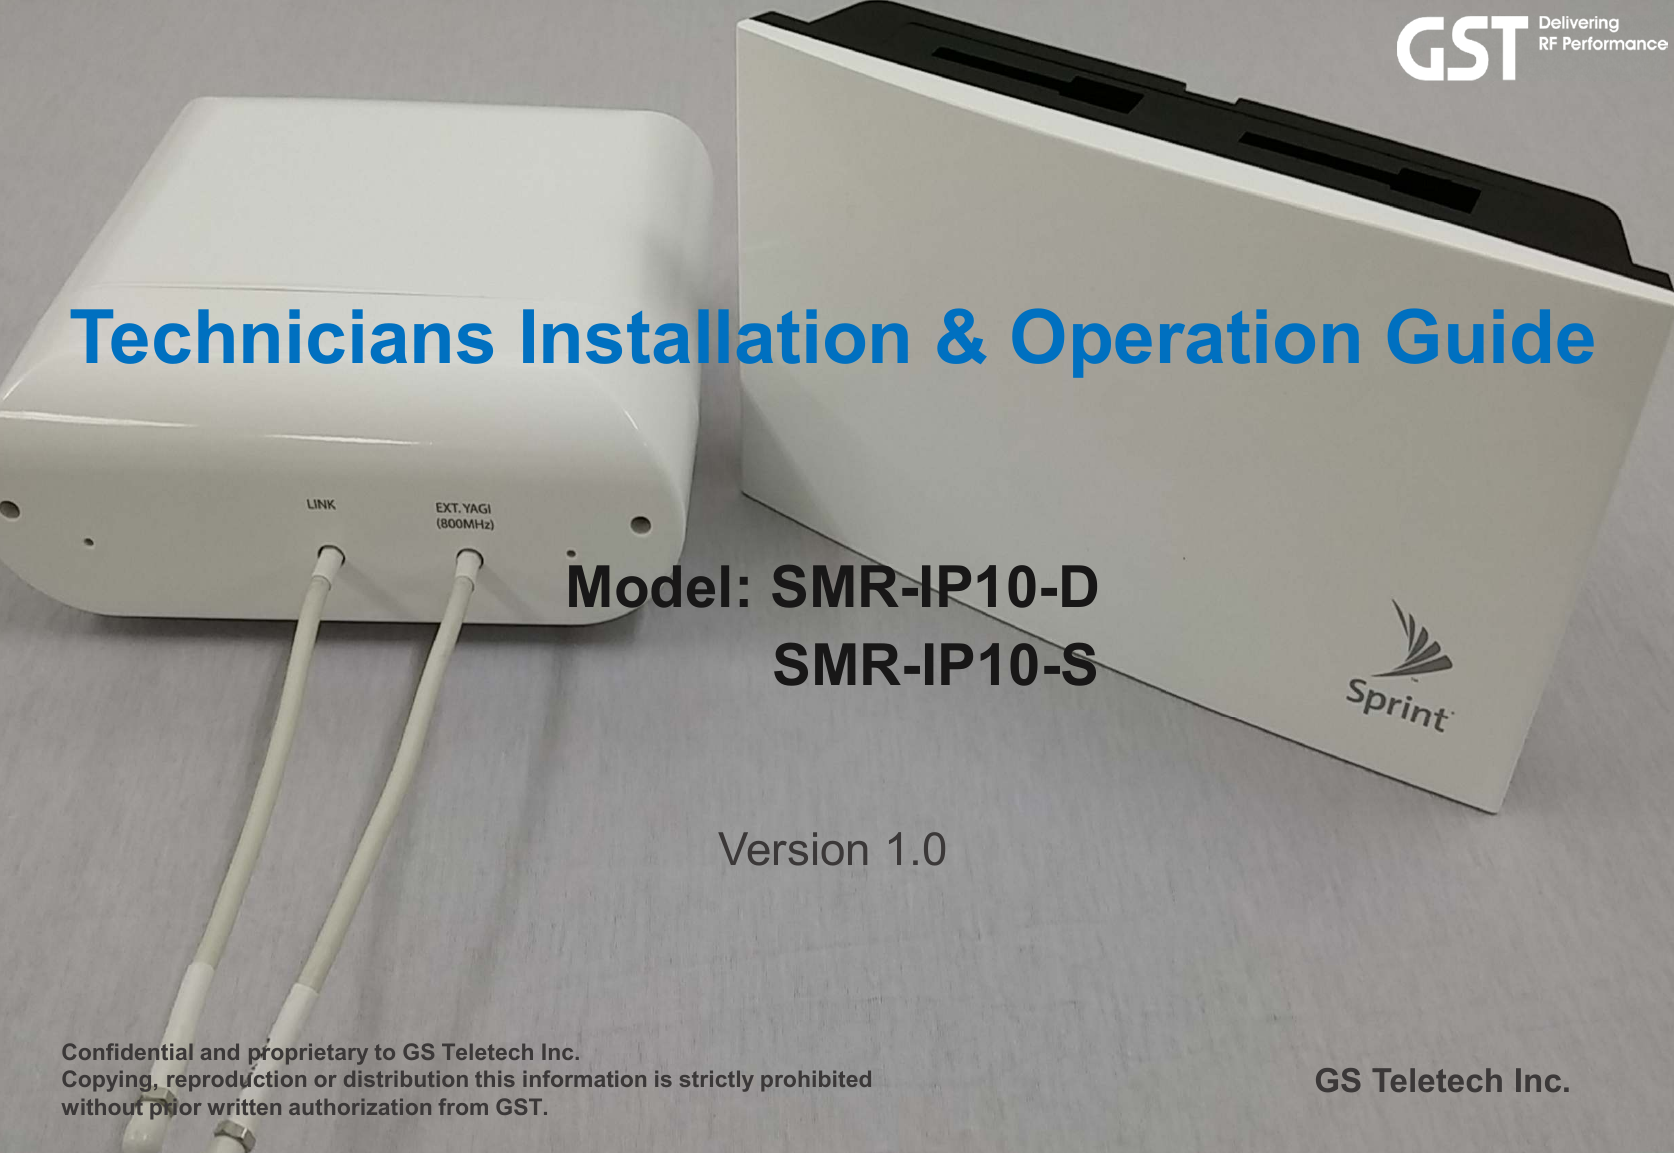 Technicians Installation &amp; Operation GuideModel: SMR-IP10-DSMR-IP10-S Version 1.0GS Teletech Inc.Confidential and proprietary to GS Teletech Inc.Copying, reproduction or distribution this information is strictly prohibitedwithout prior written authorization from GST.